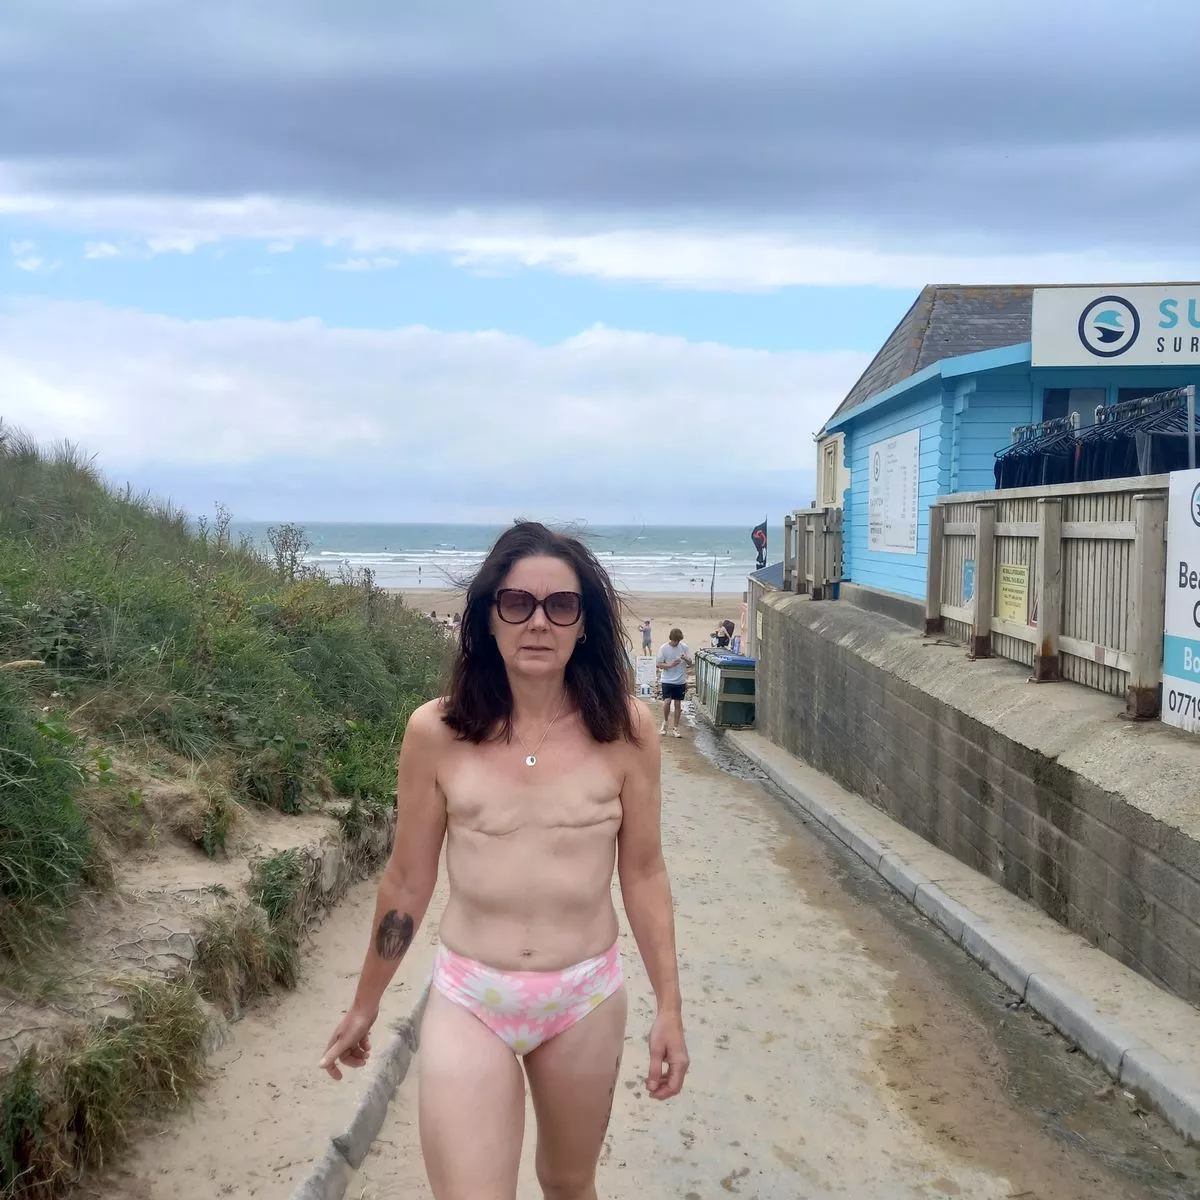 chelsea worth recommends topless beach photos pic